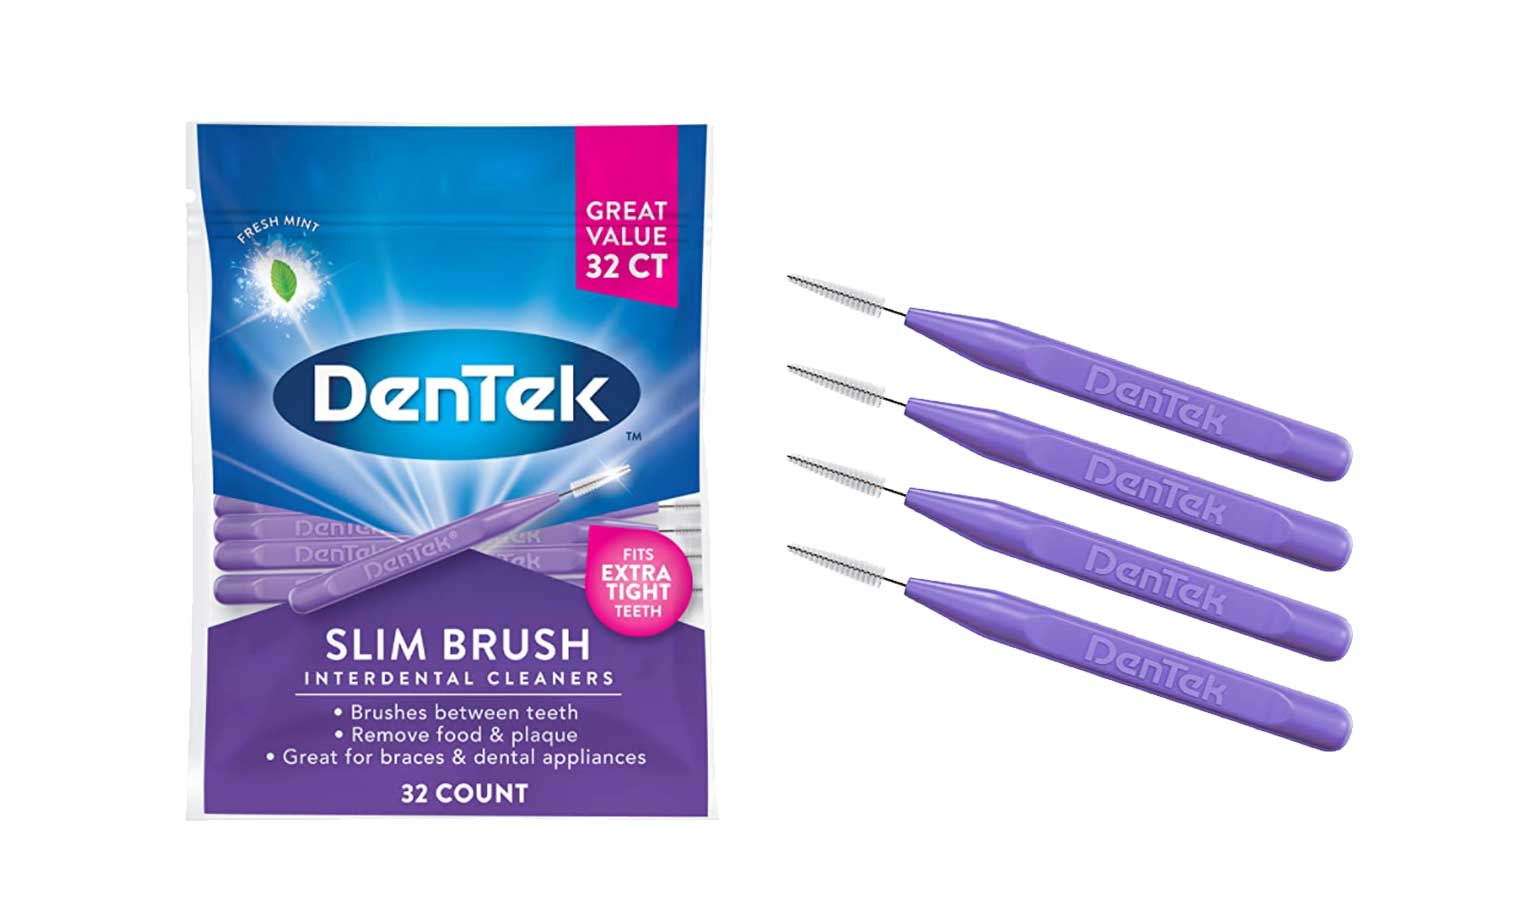 A purple and blue package of dentek interdental brushes with 4 individual brushes arranged diagonally next to it